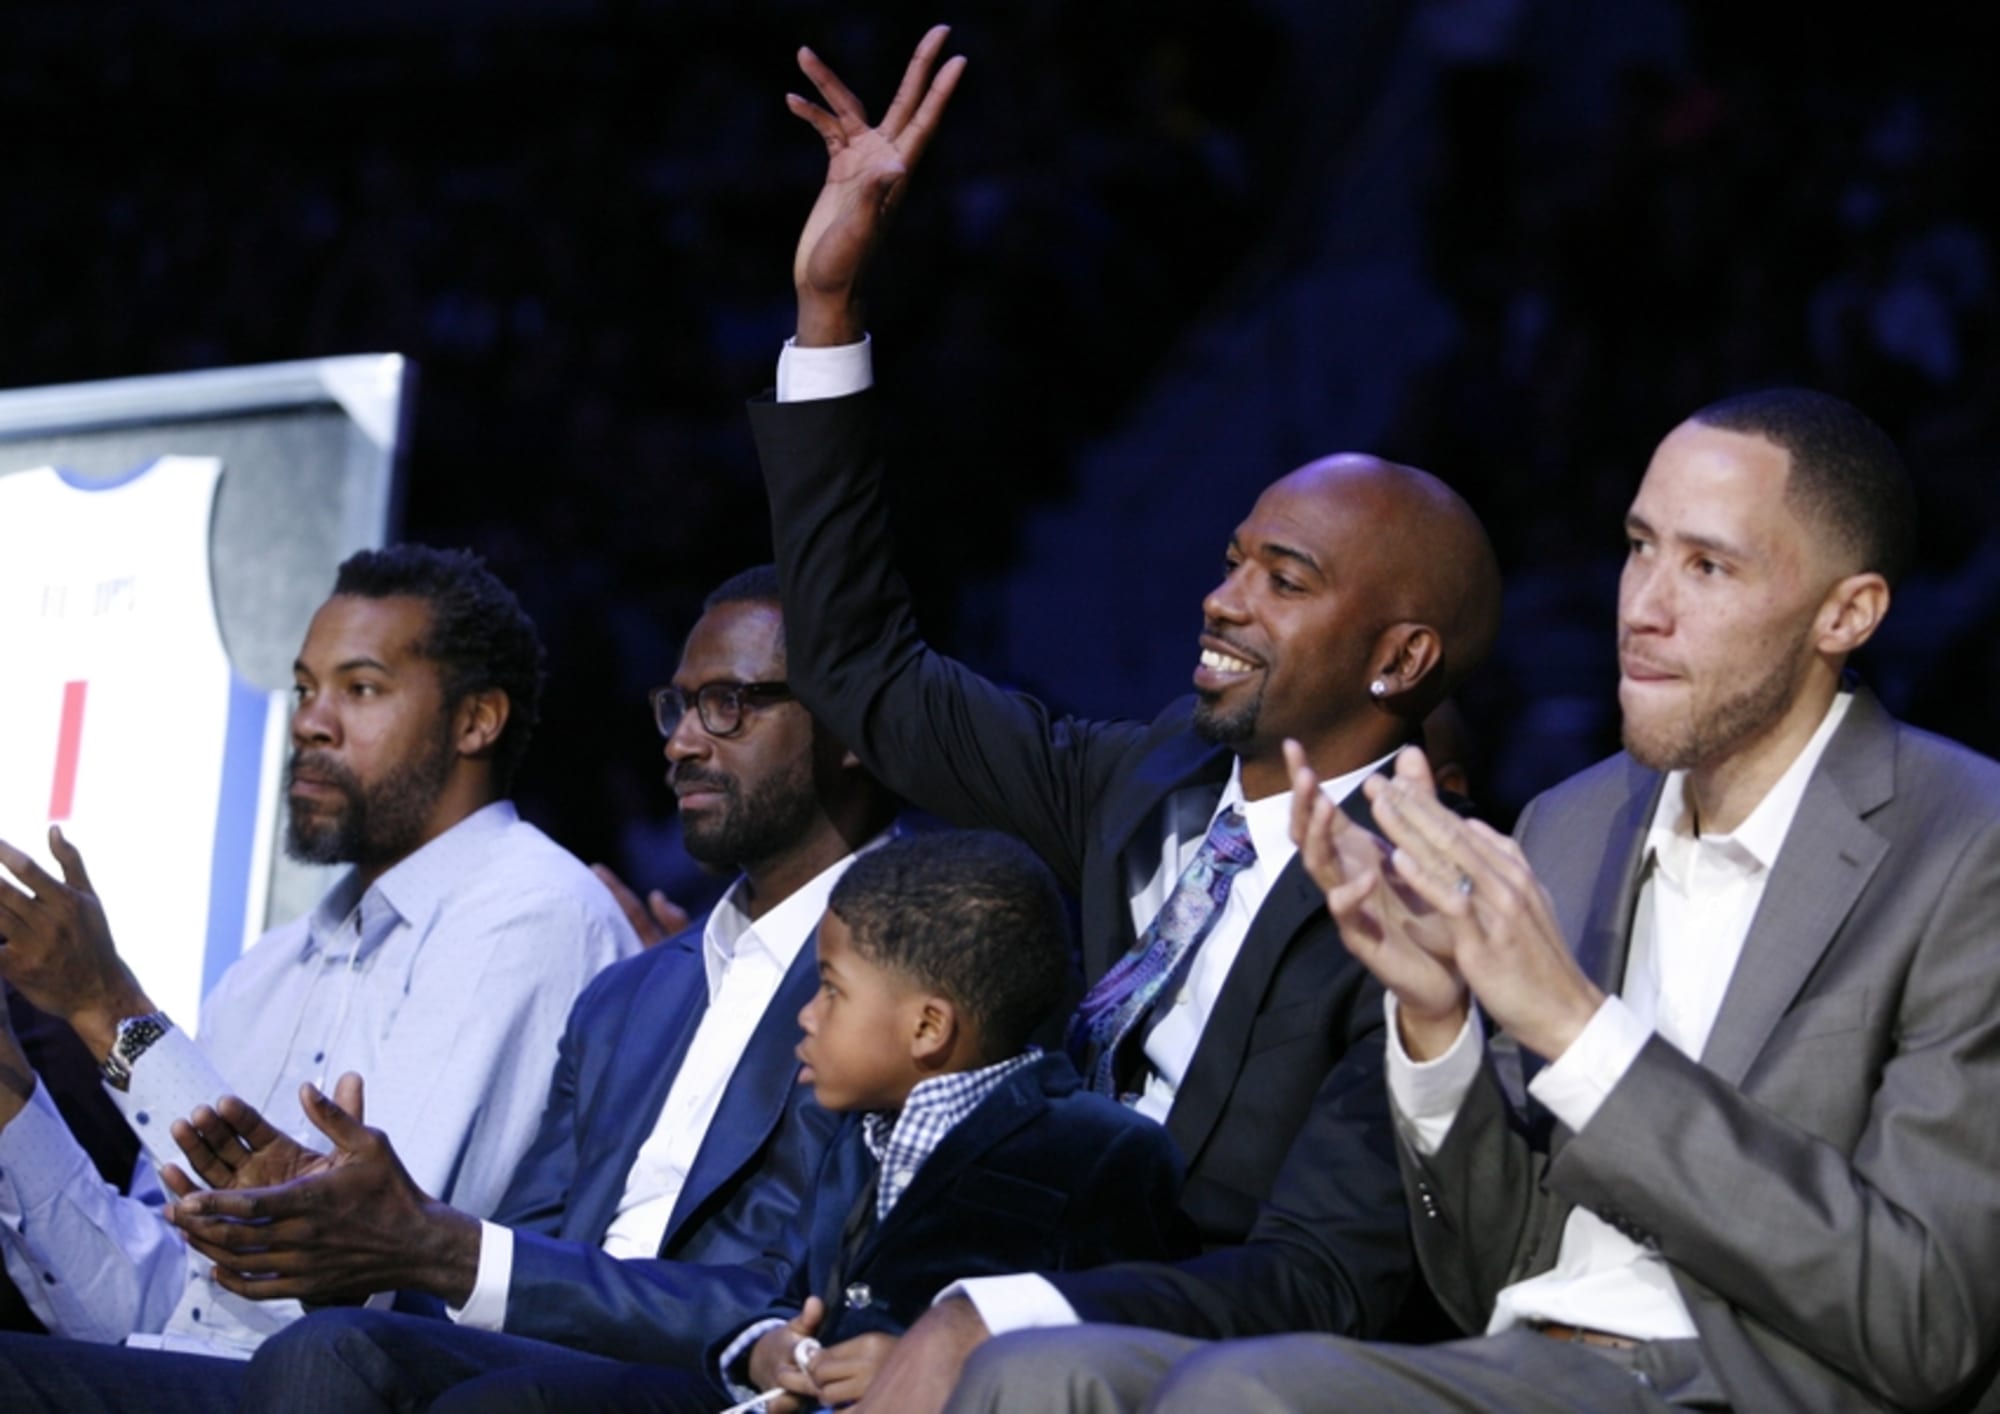 Chauncey Billups has number retired by the Detroit Pistons - The